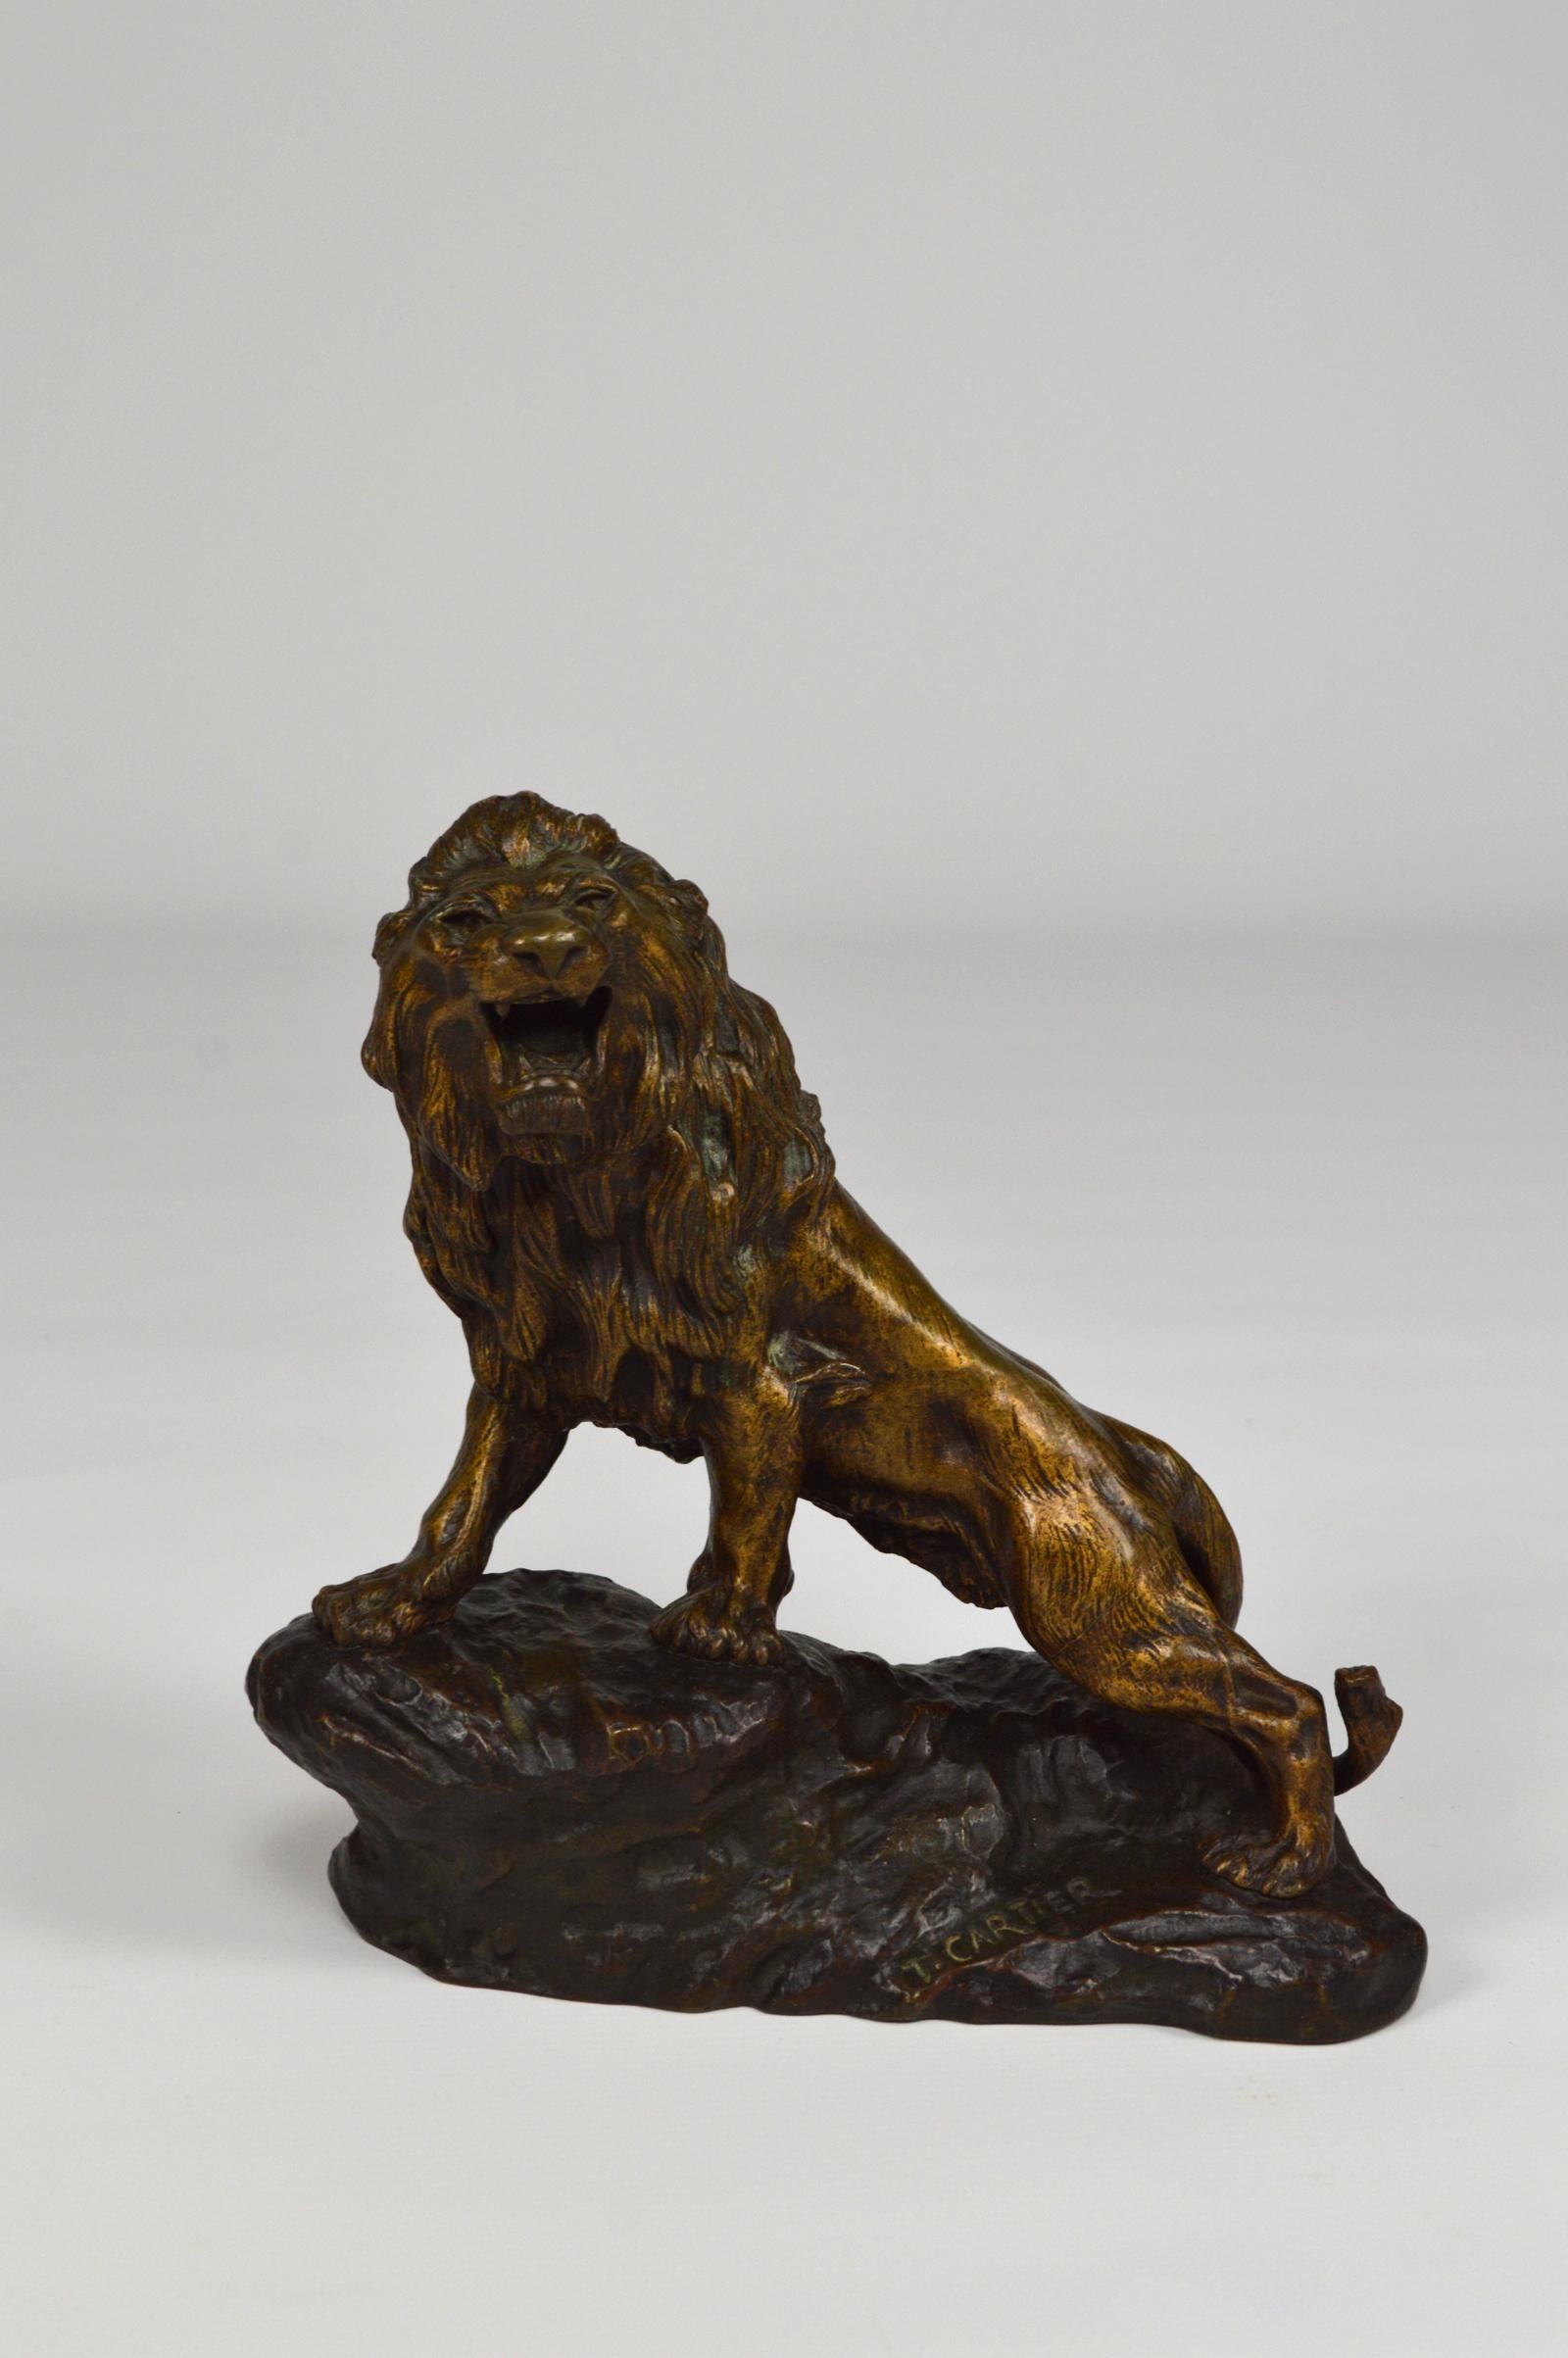 Snarling lion in bronze.
Bronze two-tone, golden for the lion, brown for the rock
Signed on the terrace / rock 